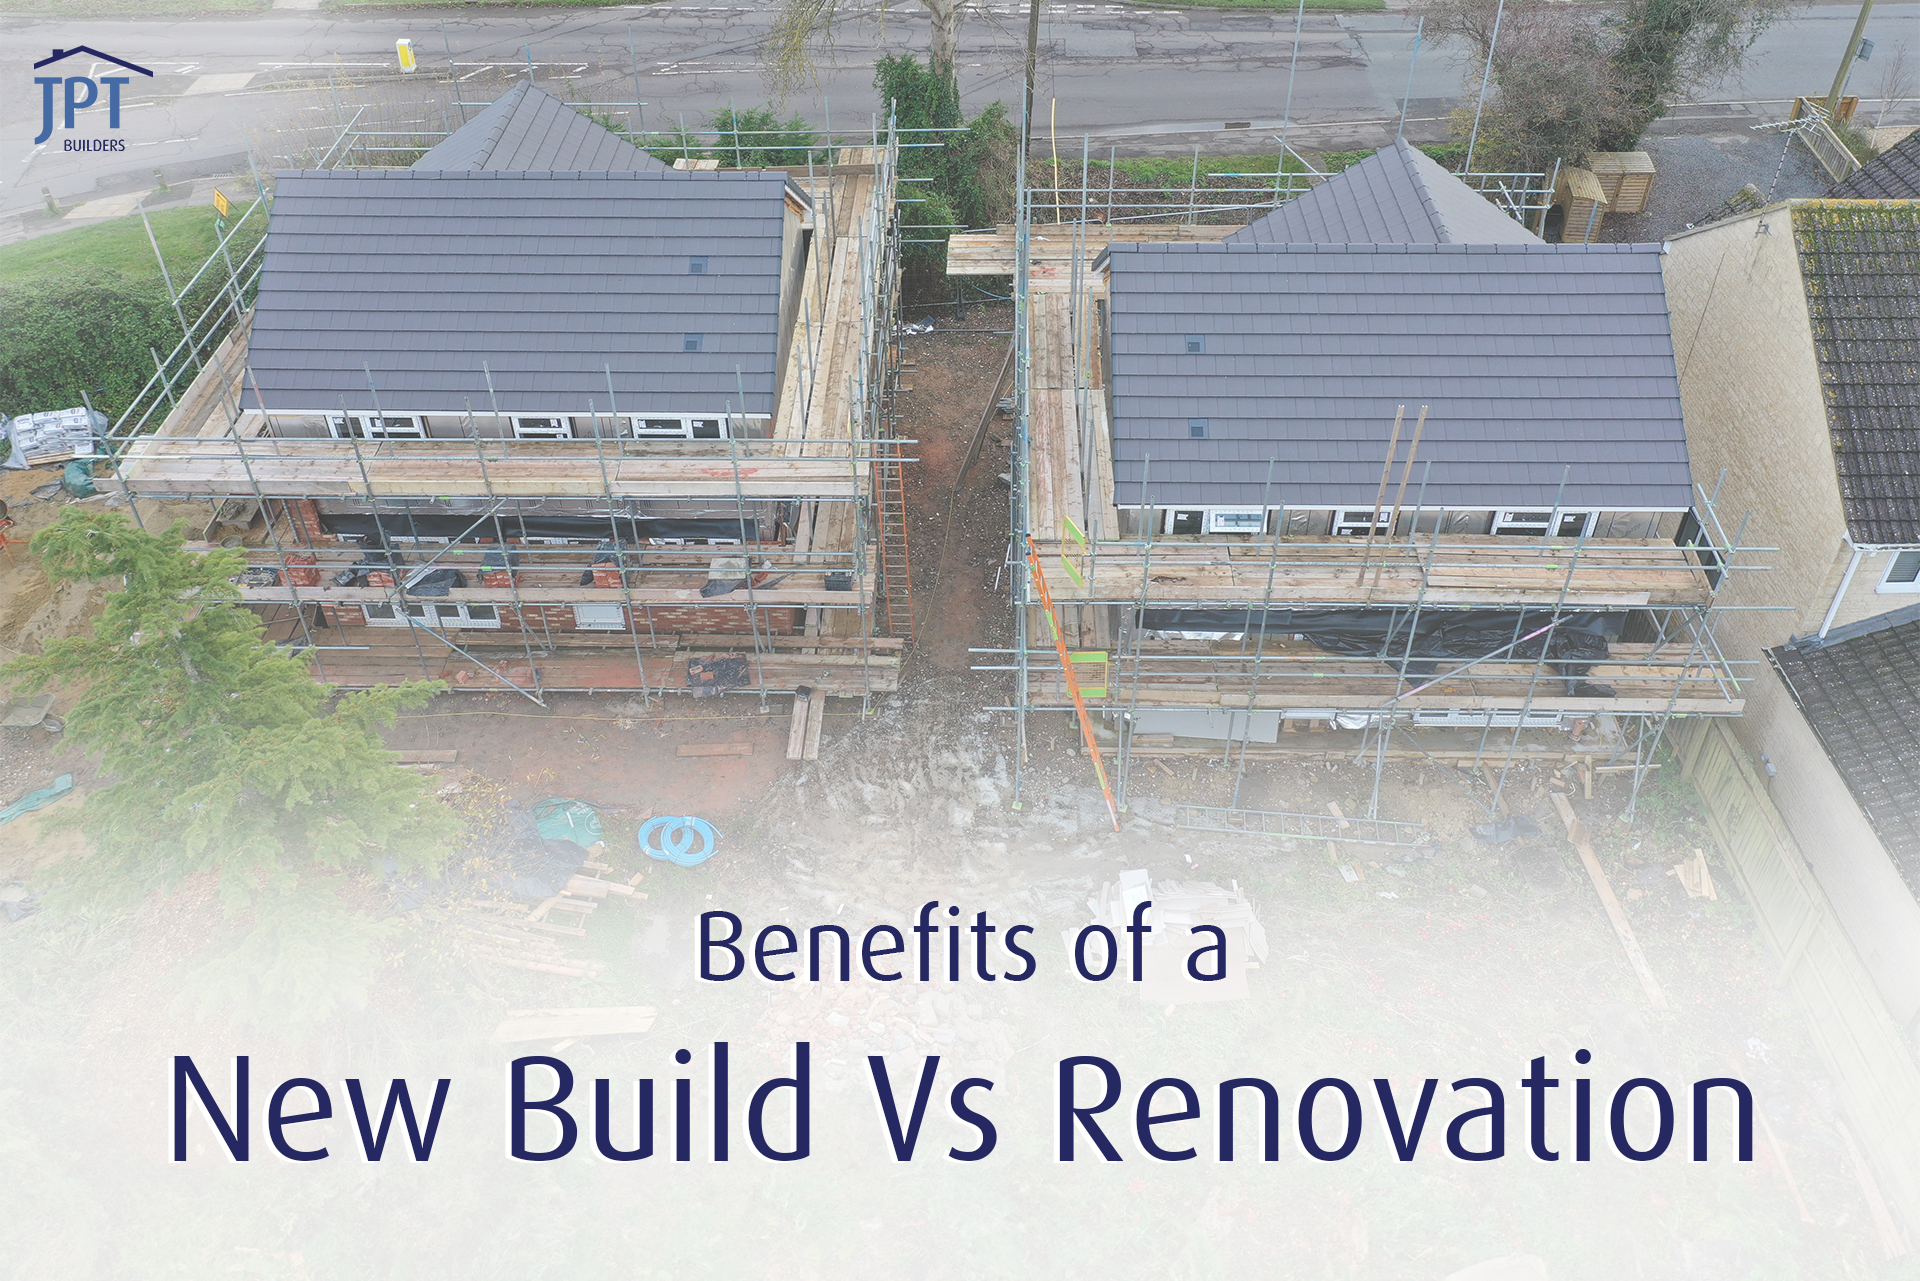 The Benefits of a New Build Over a Renovation